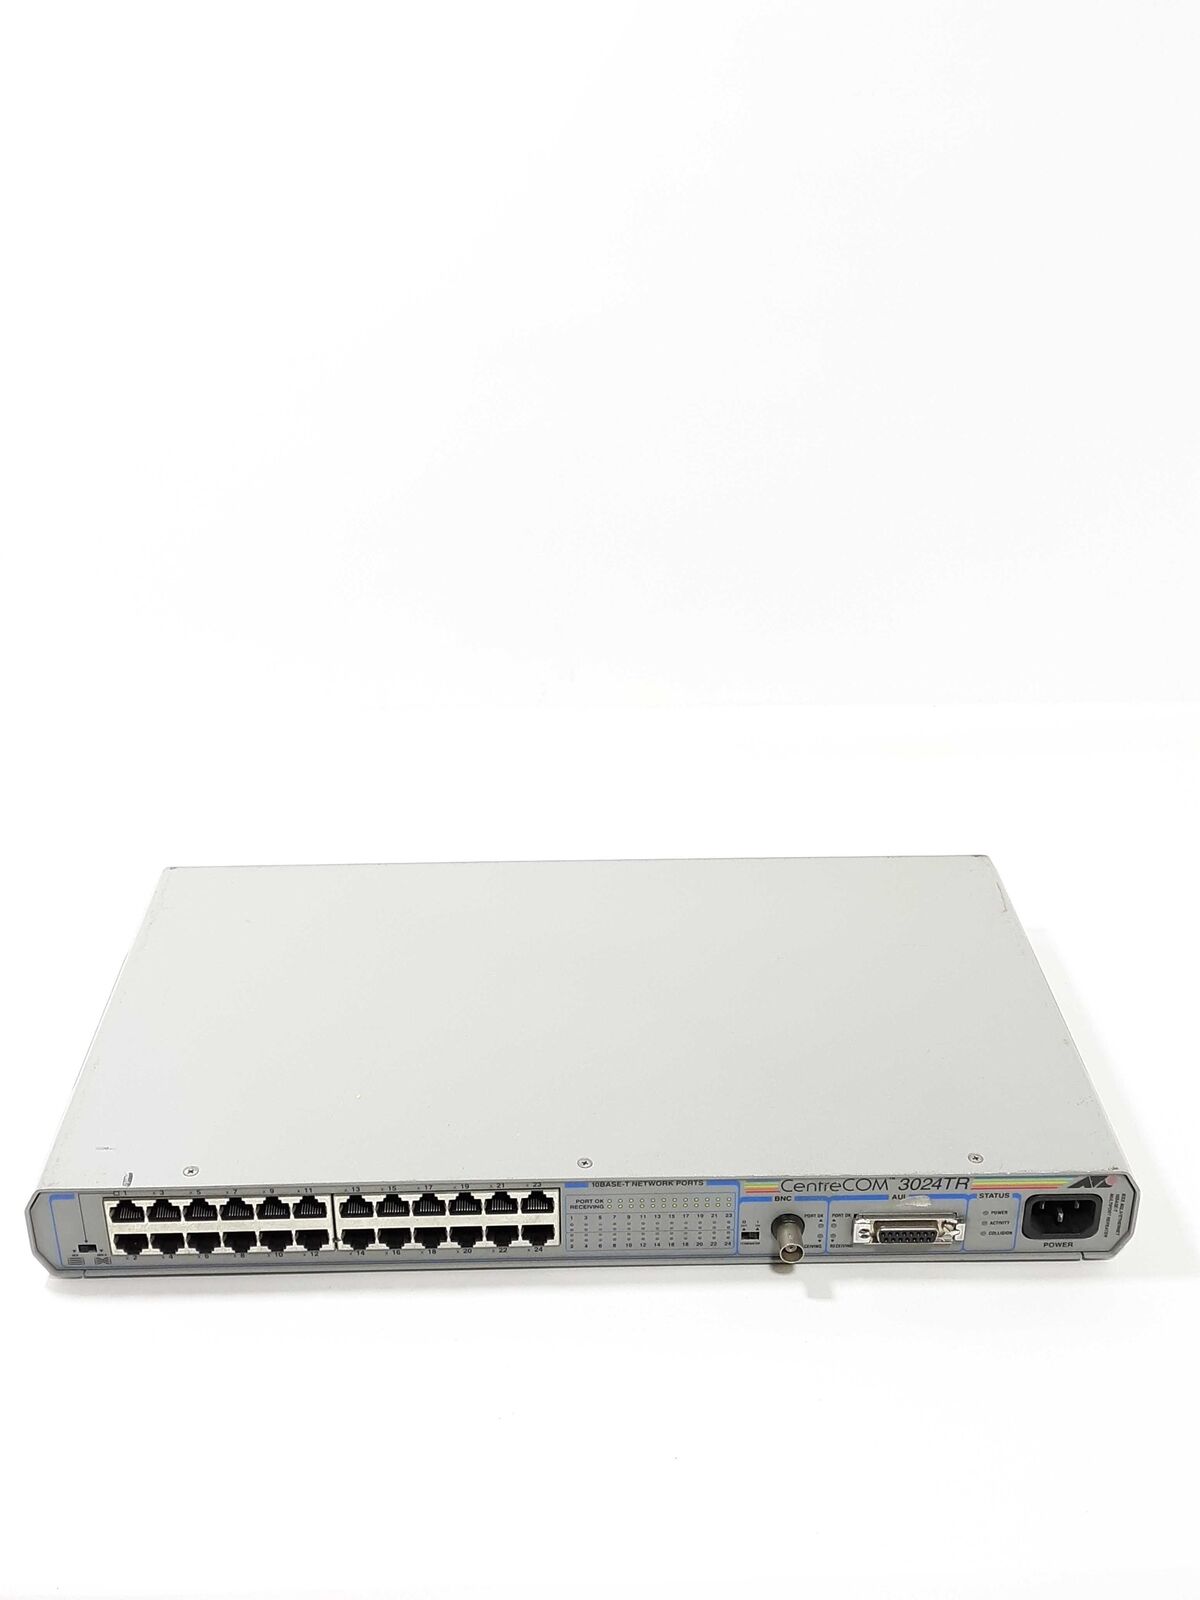 Allied Telesyn International CENTRECOM AT-3024TR 24-Port Multiport Repeater / Ou